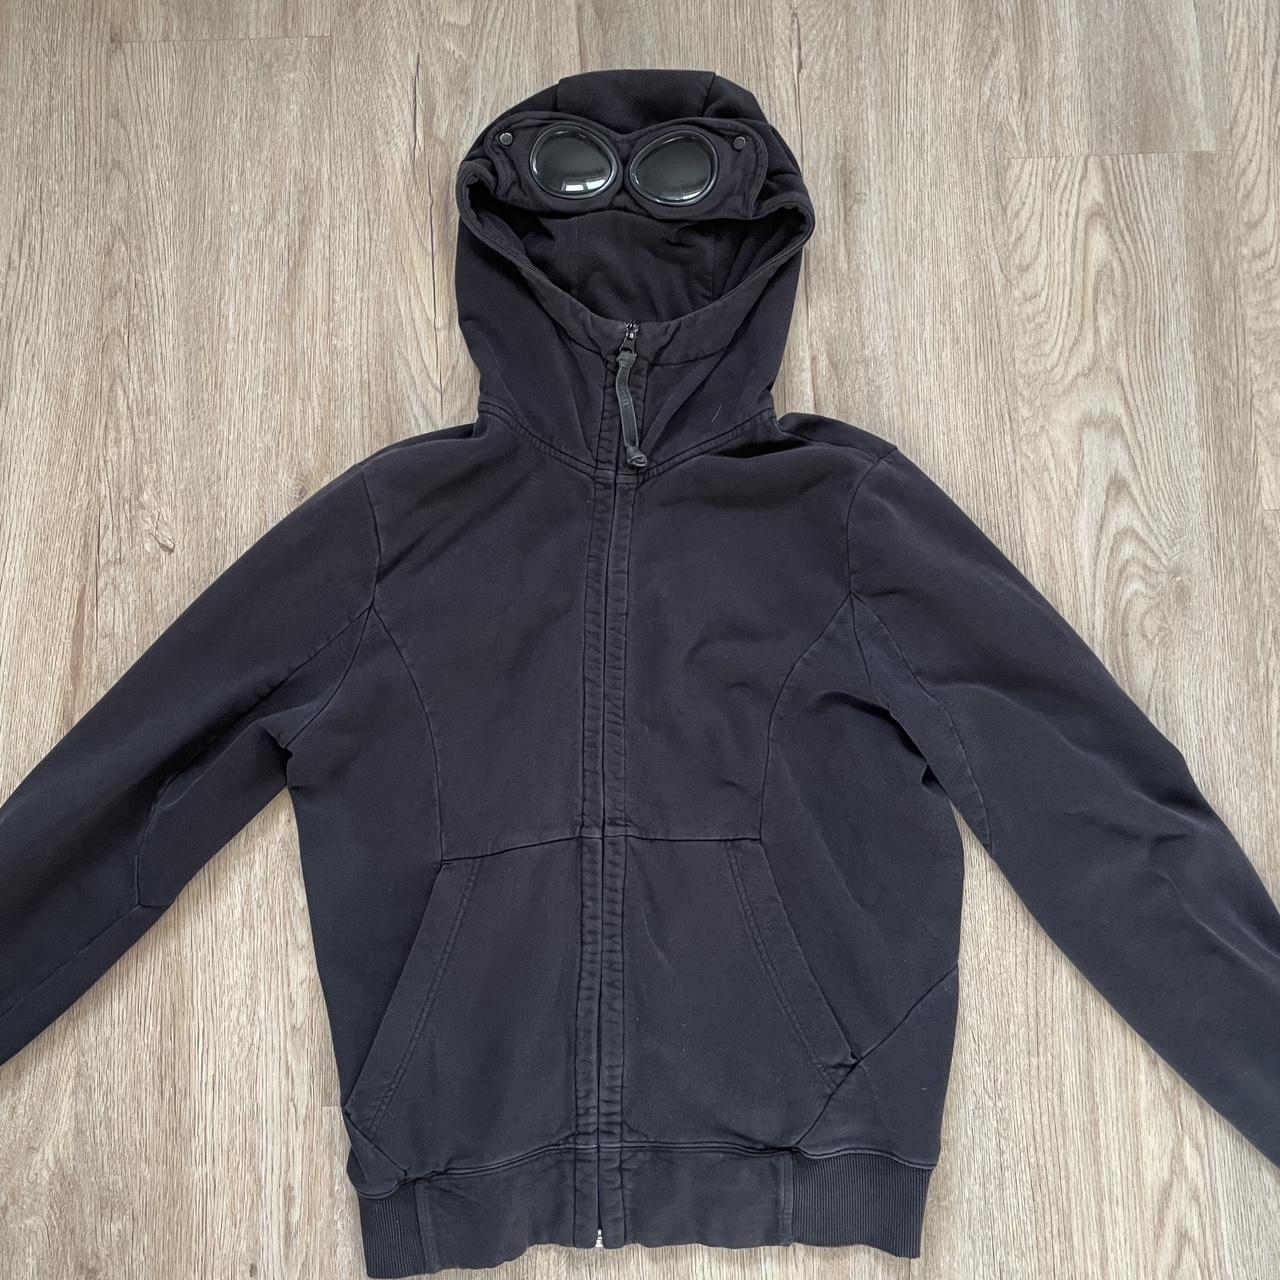 Cp company goggle hoodie Good condition apart from... - Depop